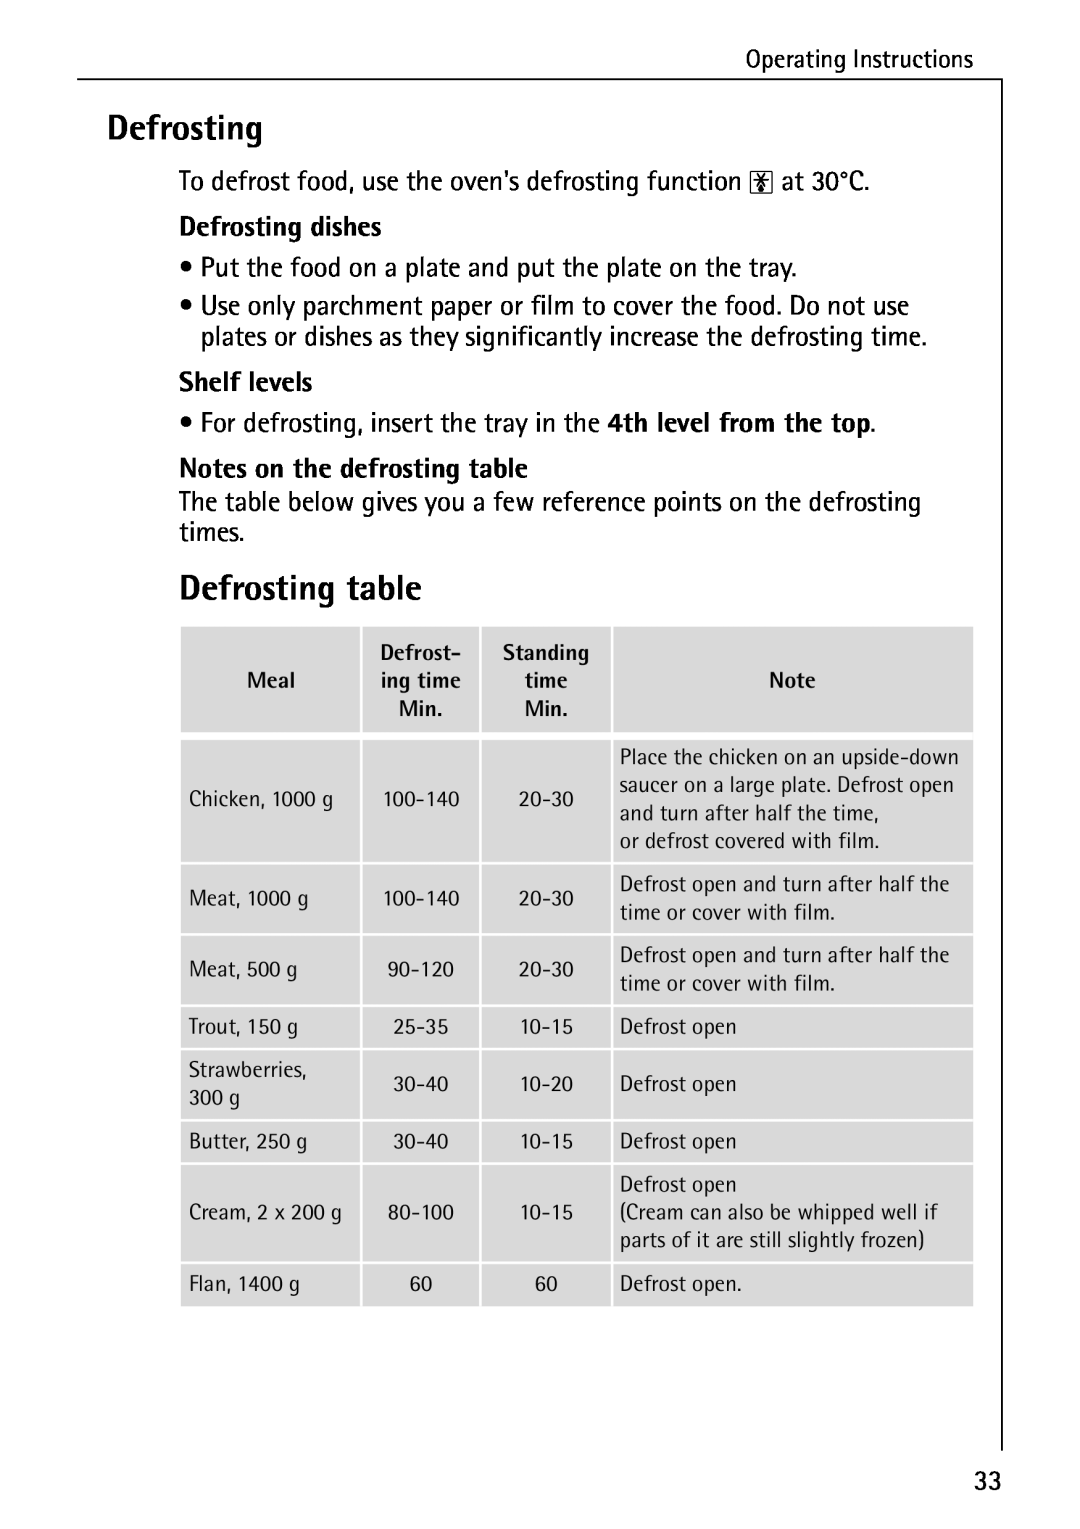 AEG B 2100 operating instructions Defrosting table, Defrosting dishes, Shelf levels, Notes on the defrosting table 